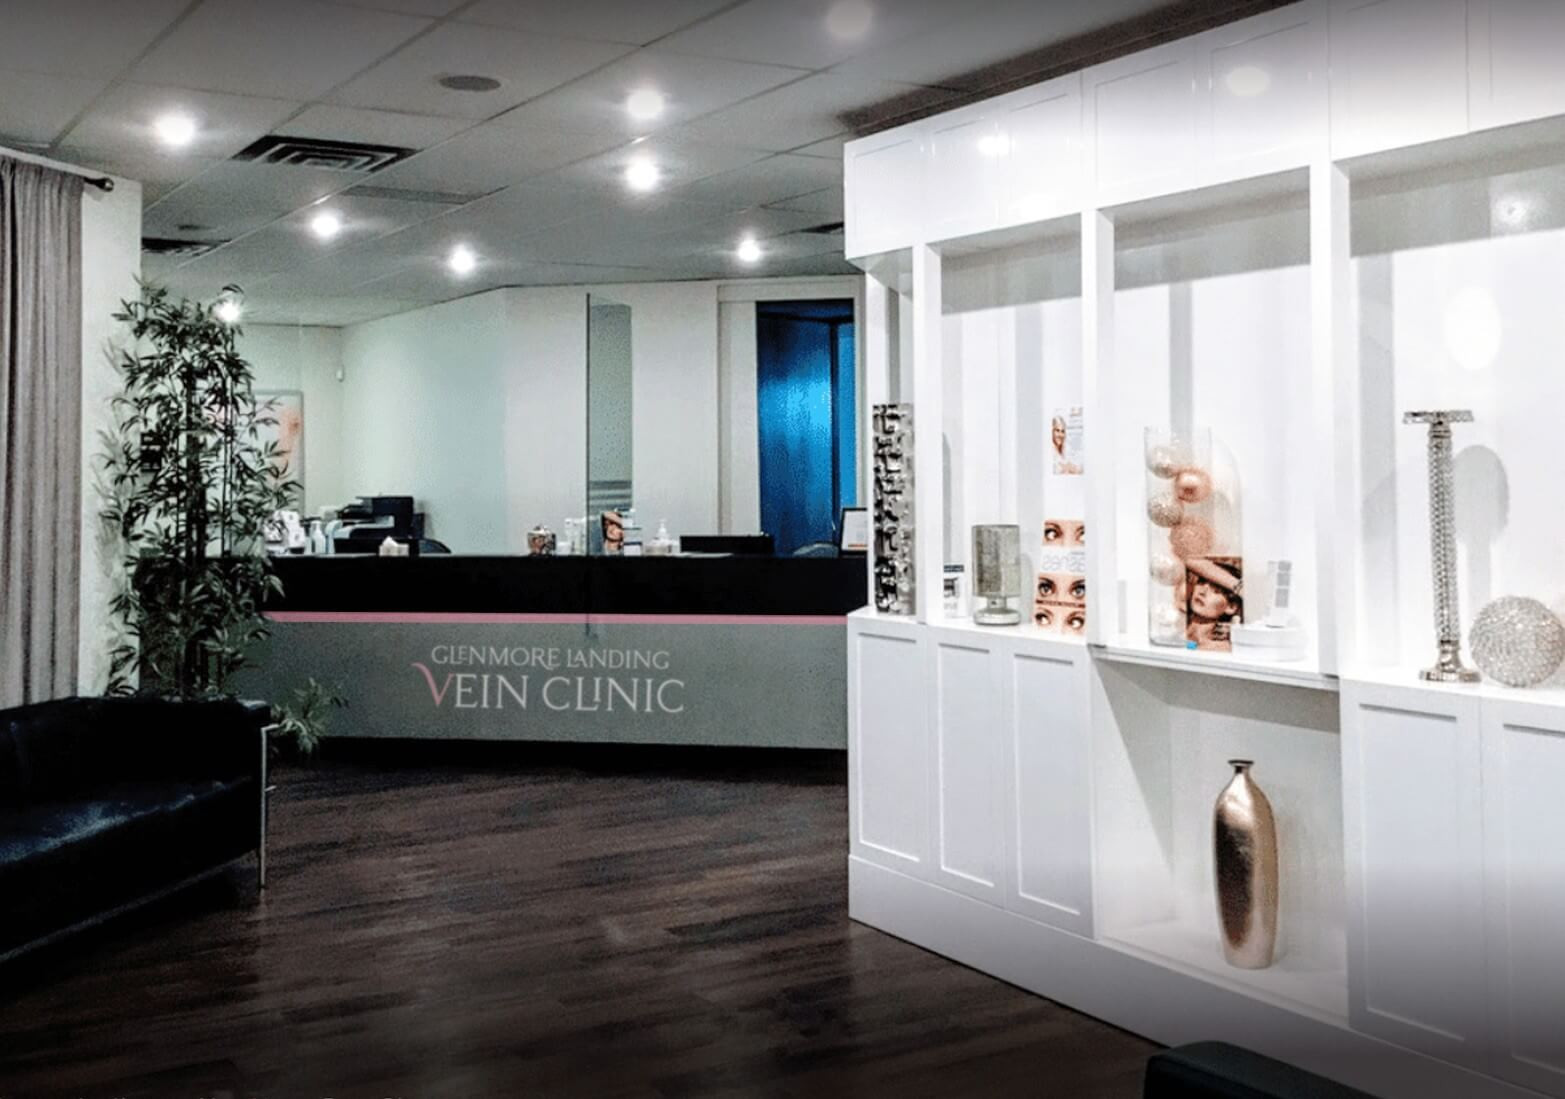 Our Calgary Facial, Body and Vein Treatments Will Leave You Looking and Feeling Your Best